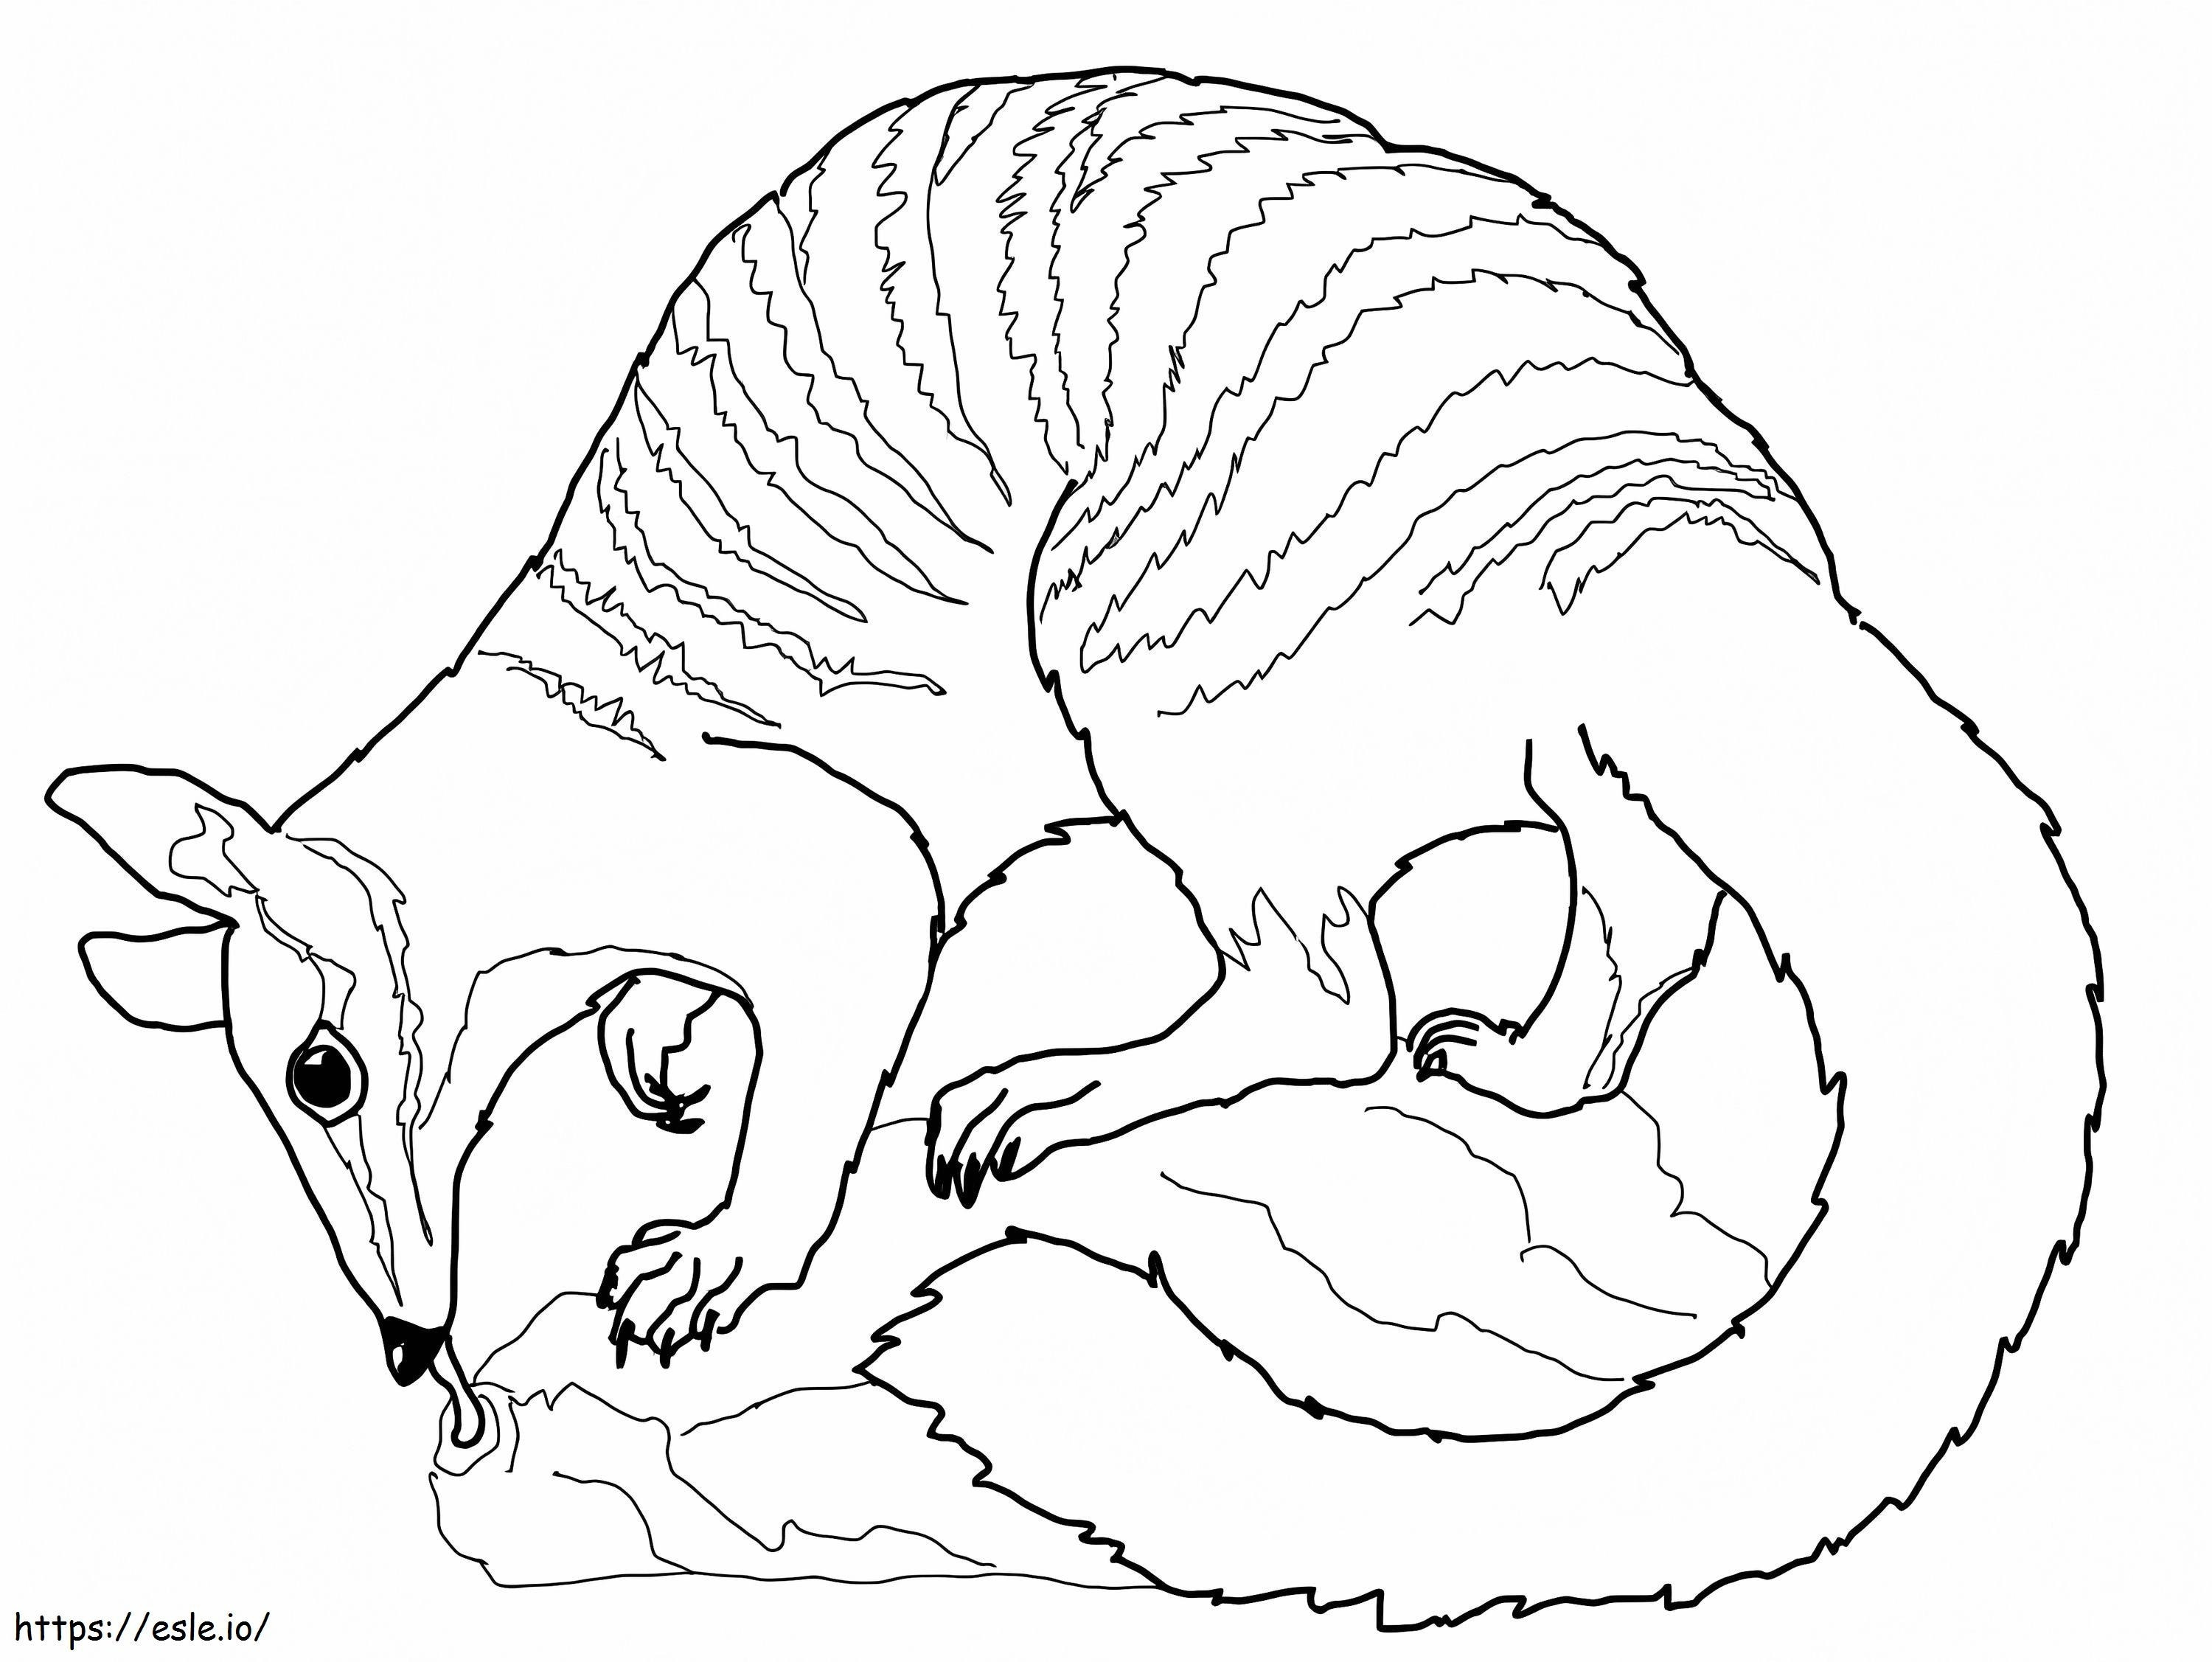 Normal Numbat coloring page